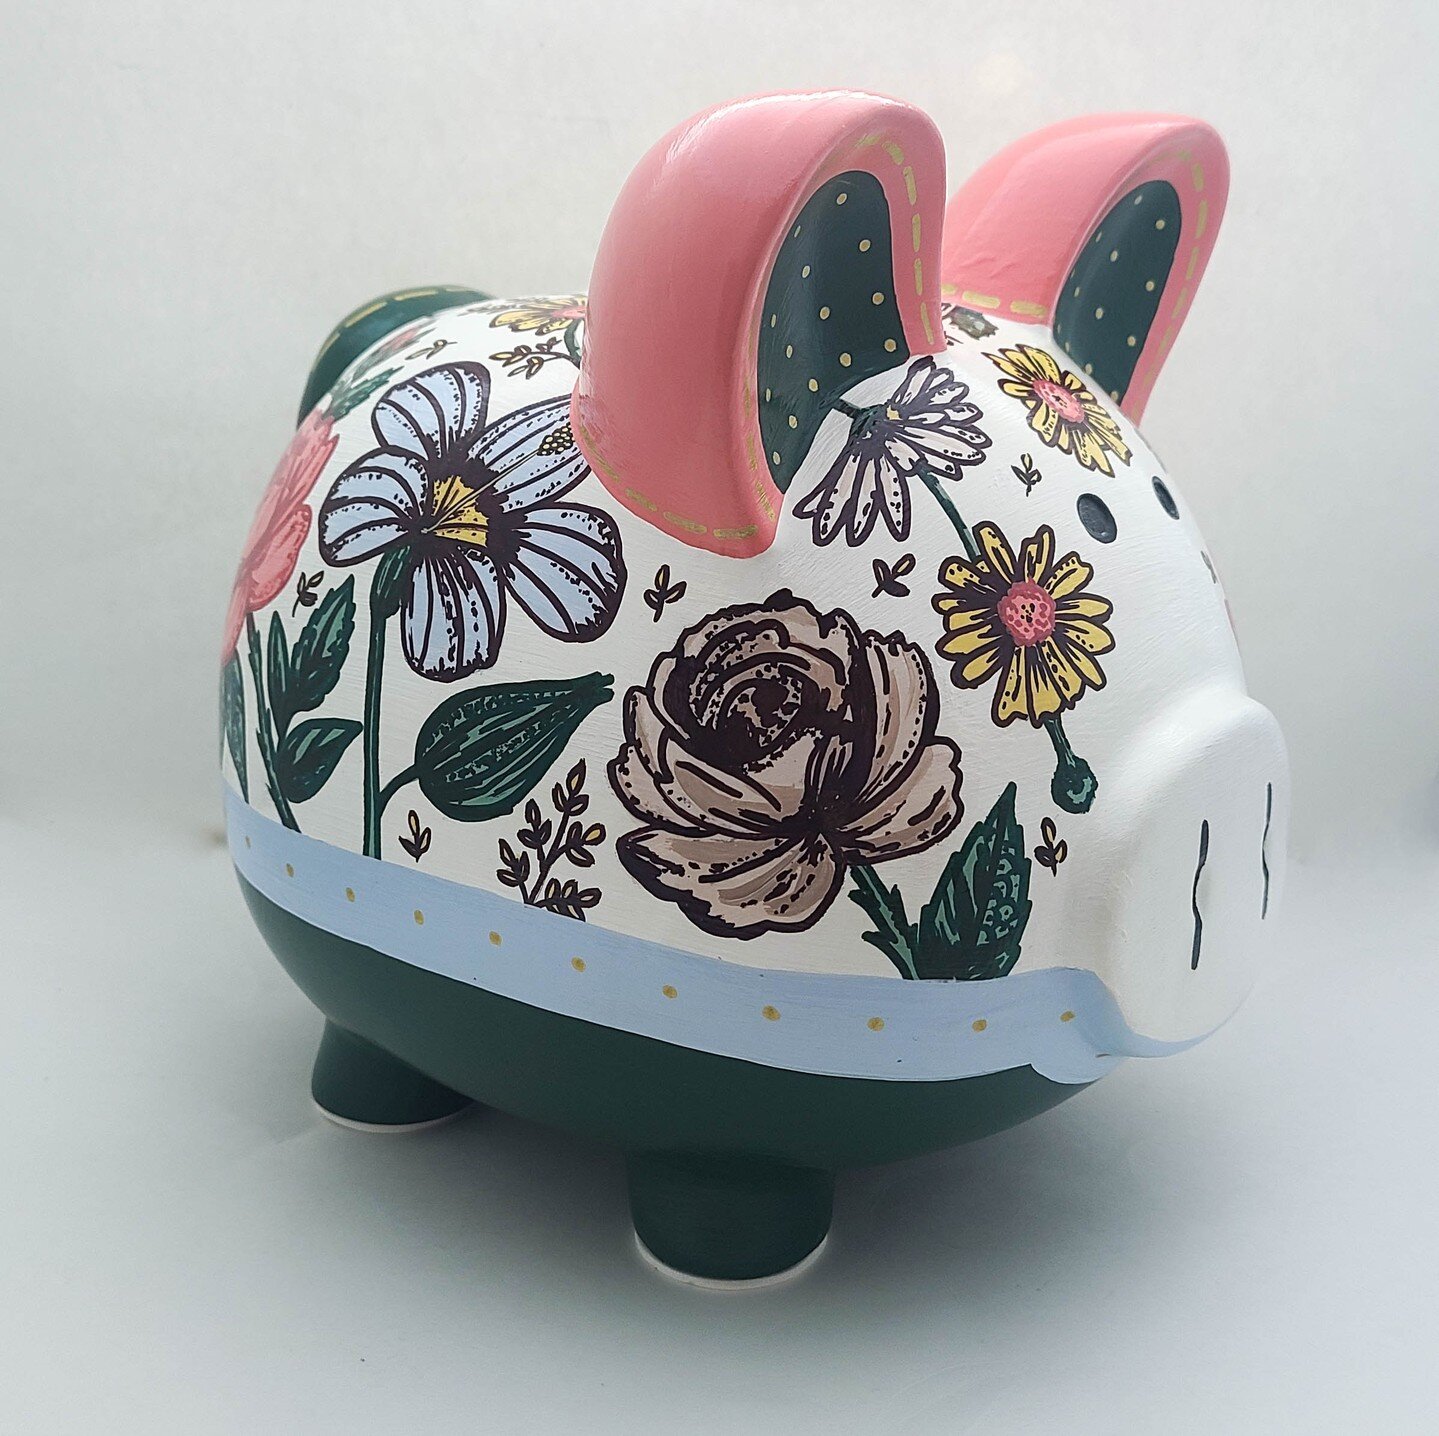 This Vintage Floral piggy bank is the perfect addition to a boho floral nursery!